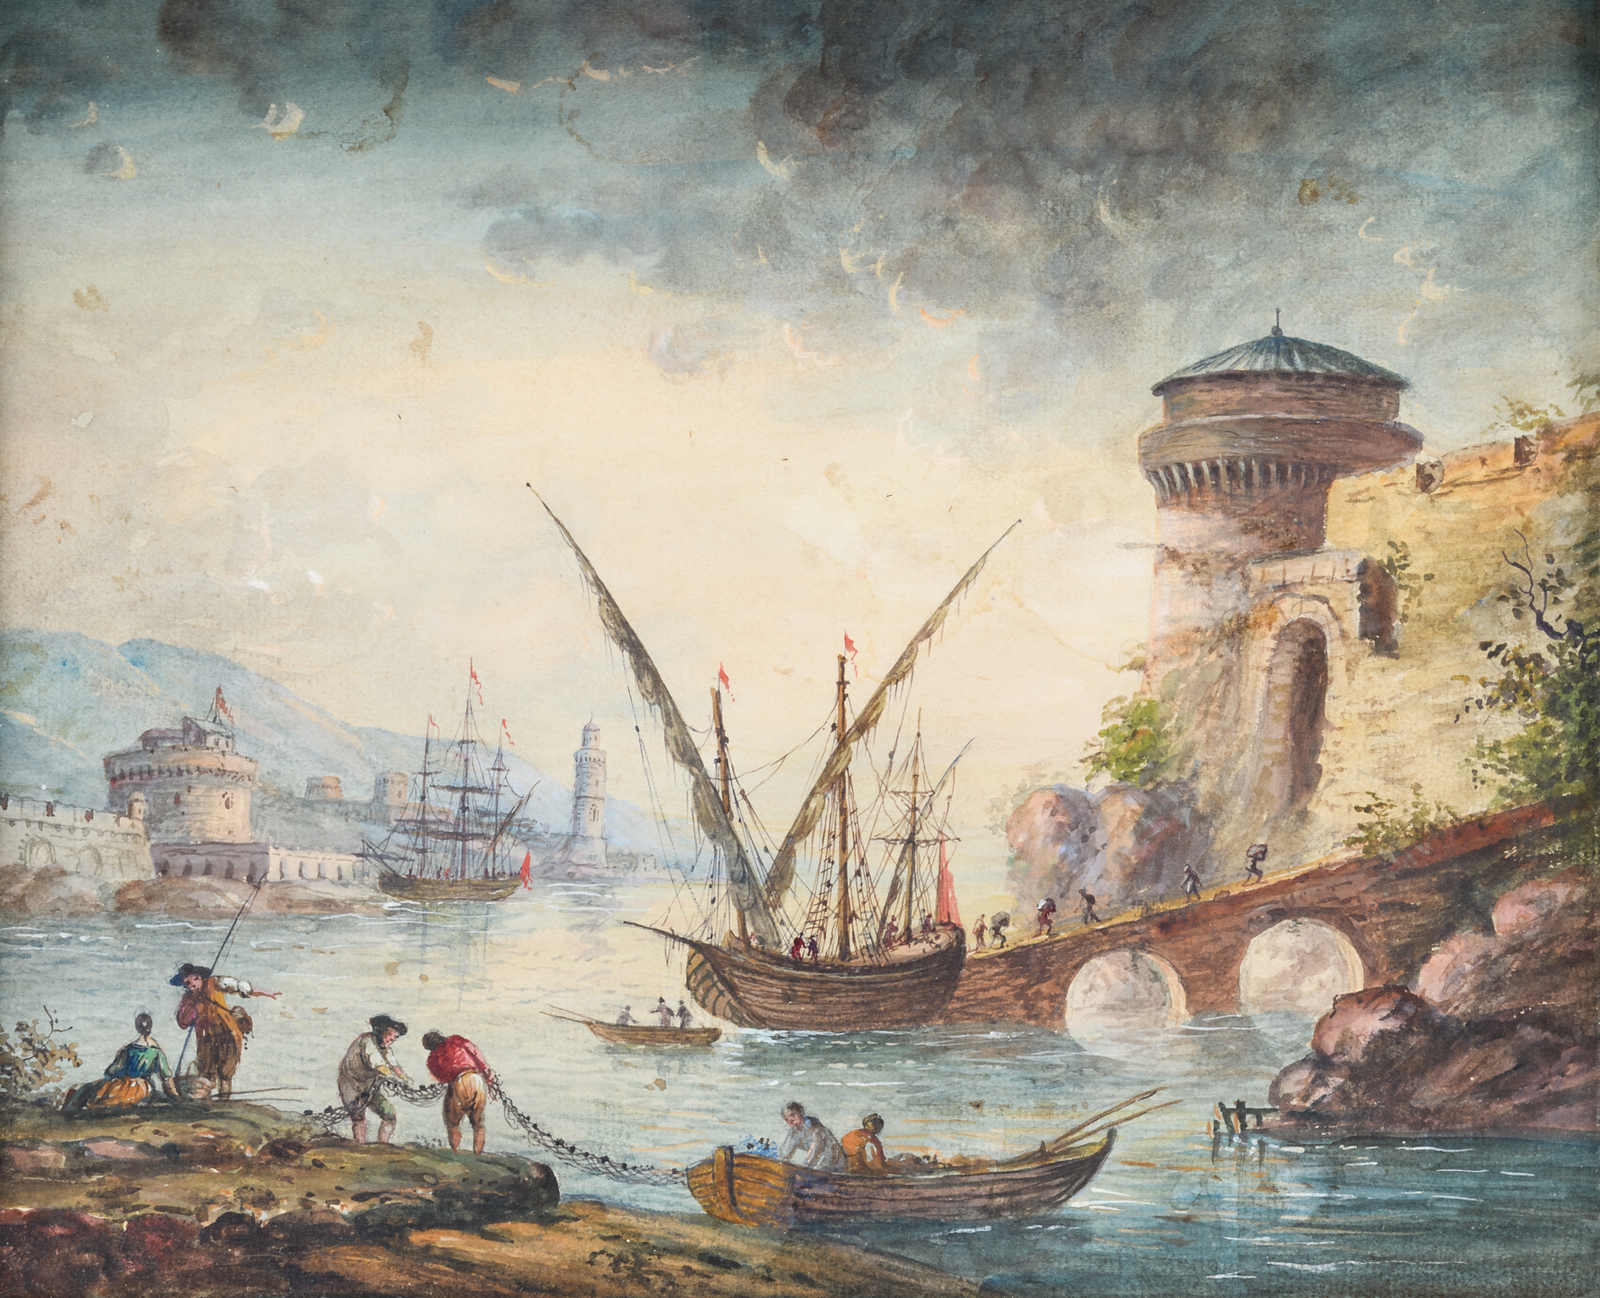 Unsigned, a view on a Mediterranian inner port, after an 18thC engraving, watercolour, 29 x 35 cm